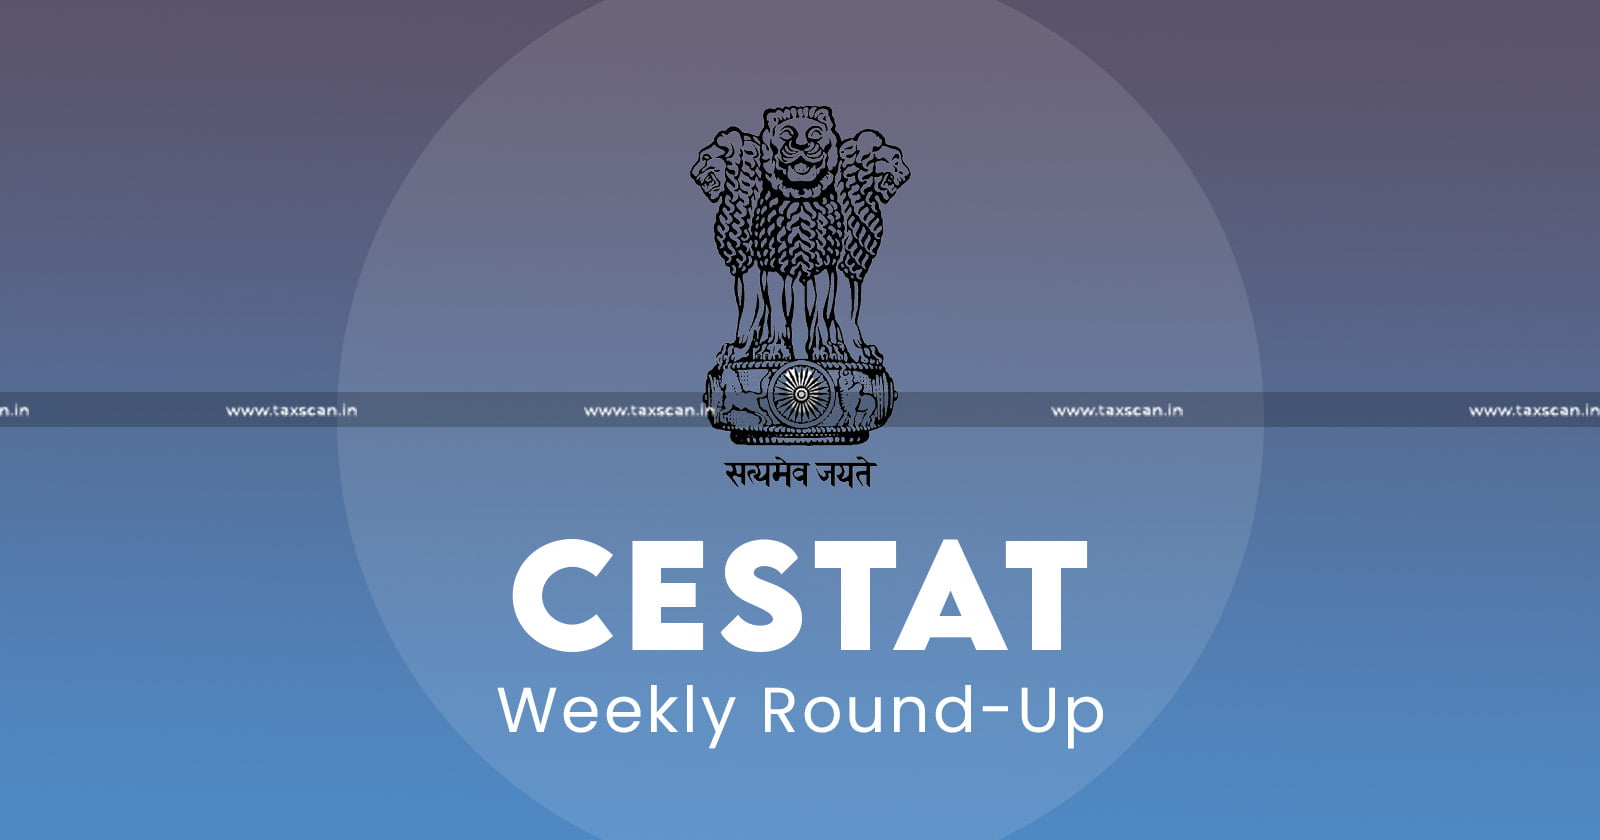 CESTAT Weekely Roundup - CESTAT - Weekly Round Up - taxscan